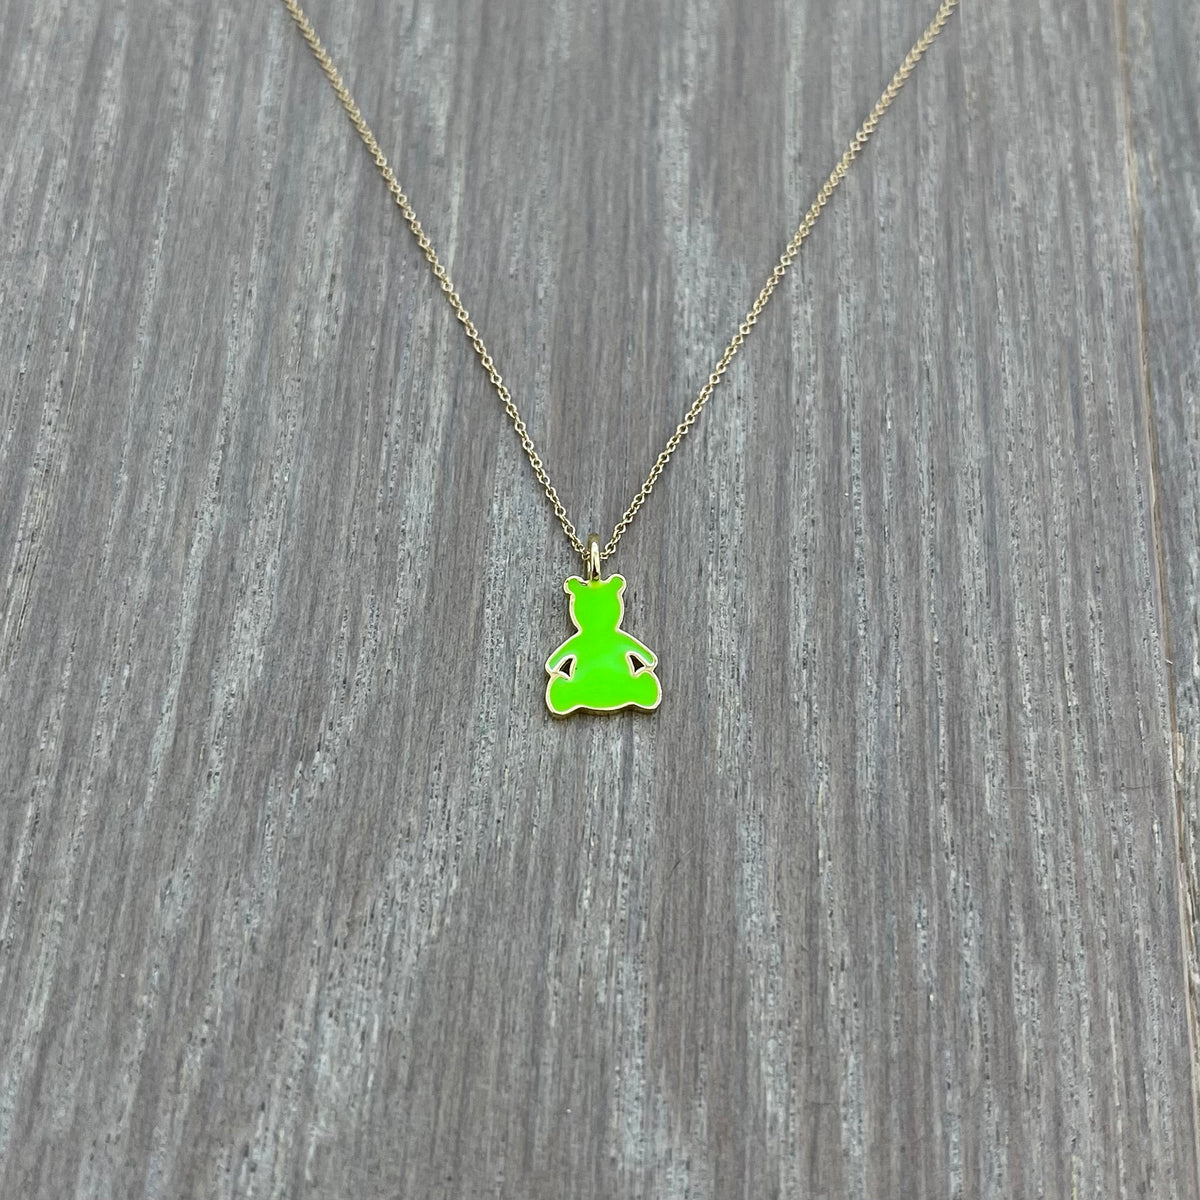 Neon Green Gold Teddy Bear Pendant with Necklace | K by Krystyna